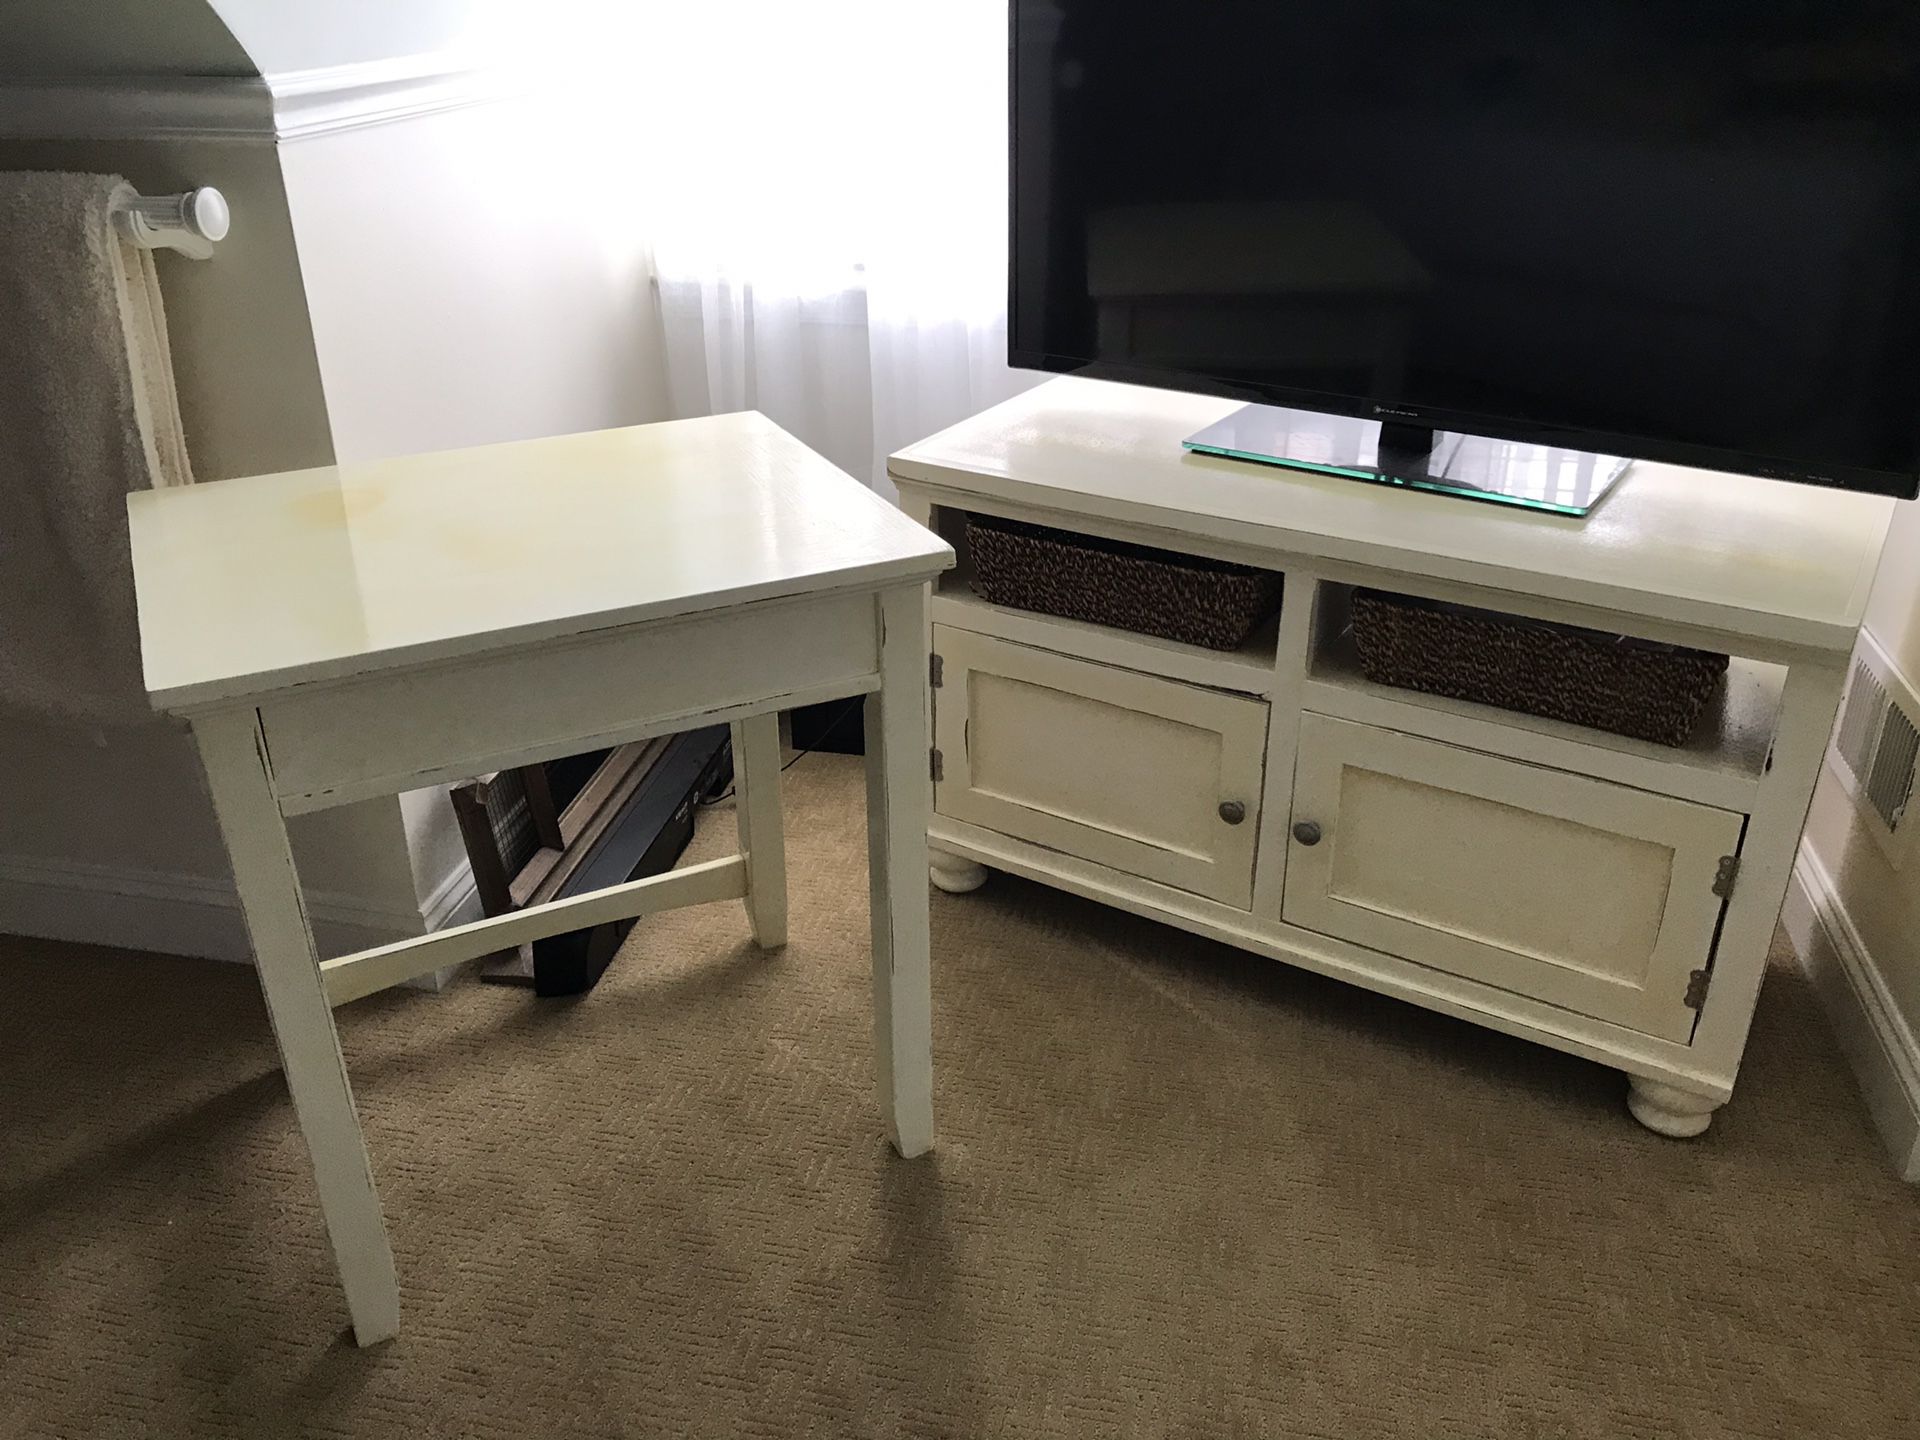 TV stand and end table. White distressed look. Very cute storage. End table is a little higher than a normal end table but is more level with a couch